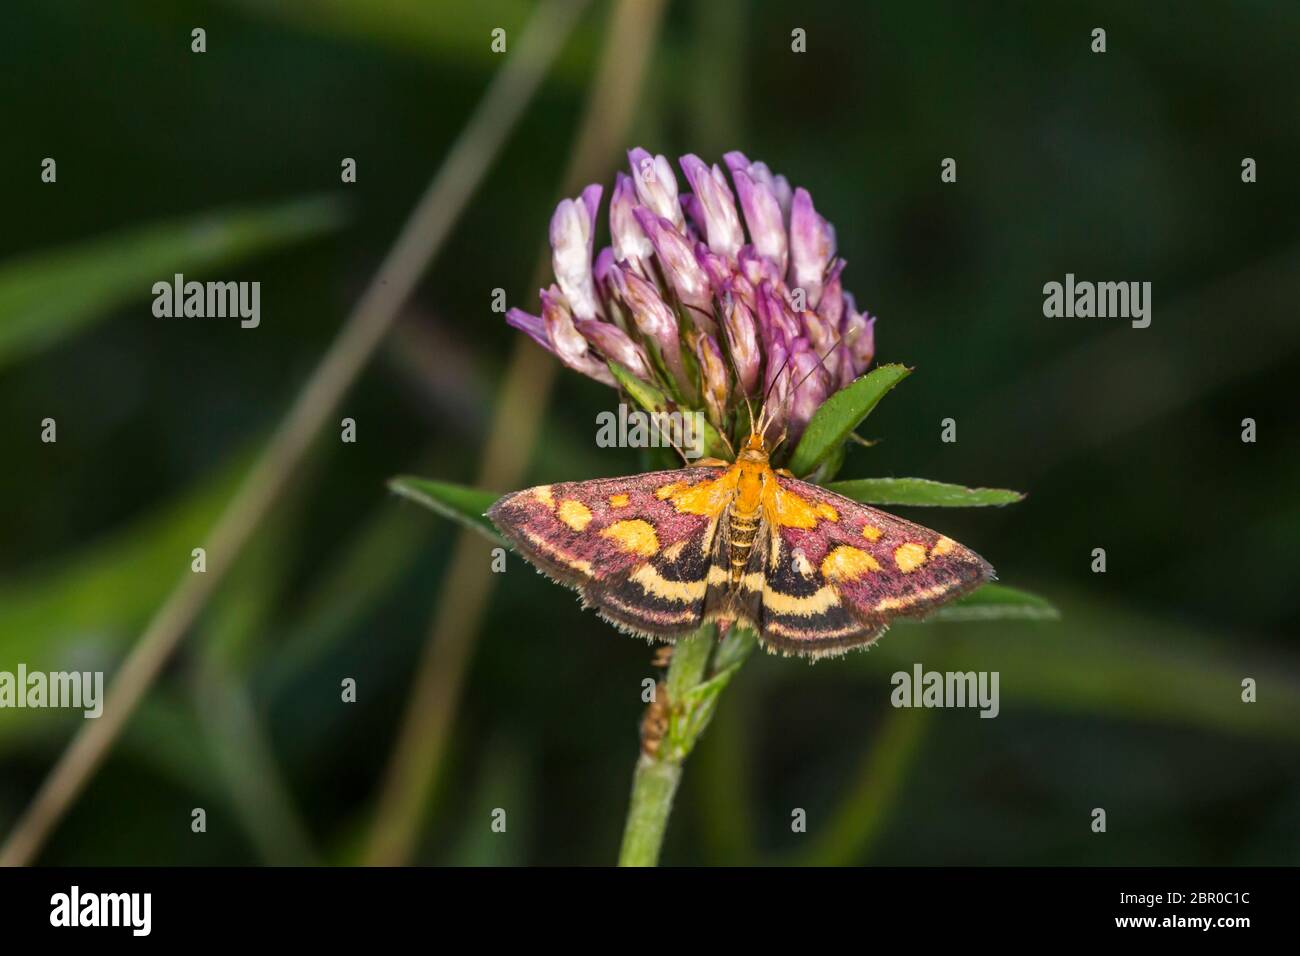 A purple borer is sitting on red clover Stock Photo